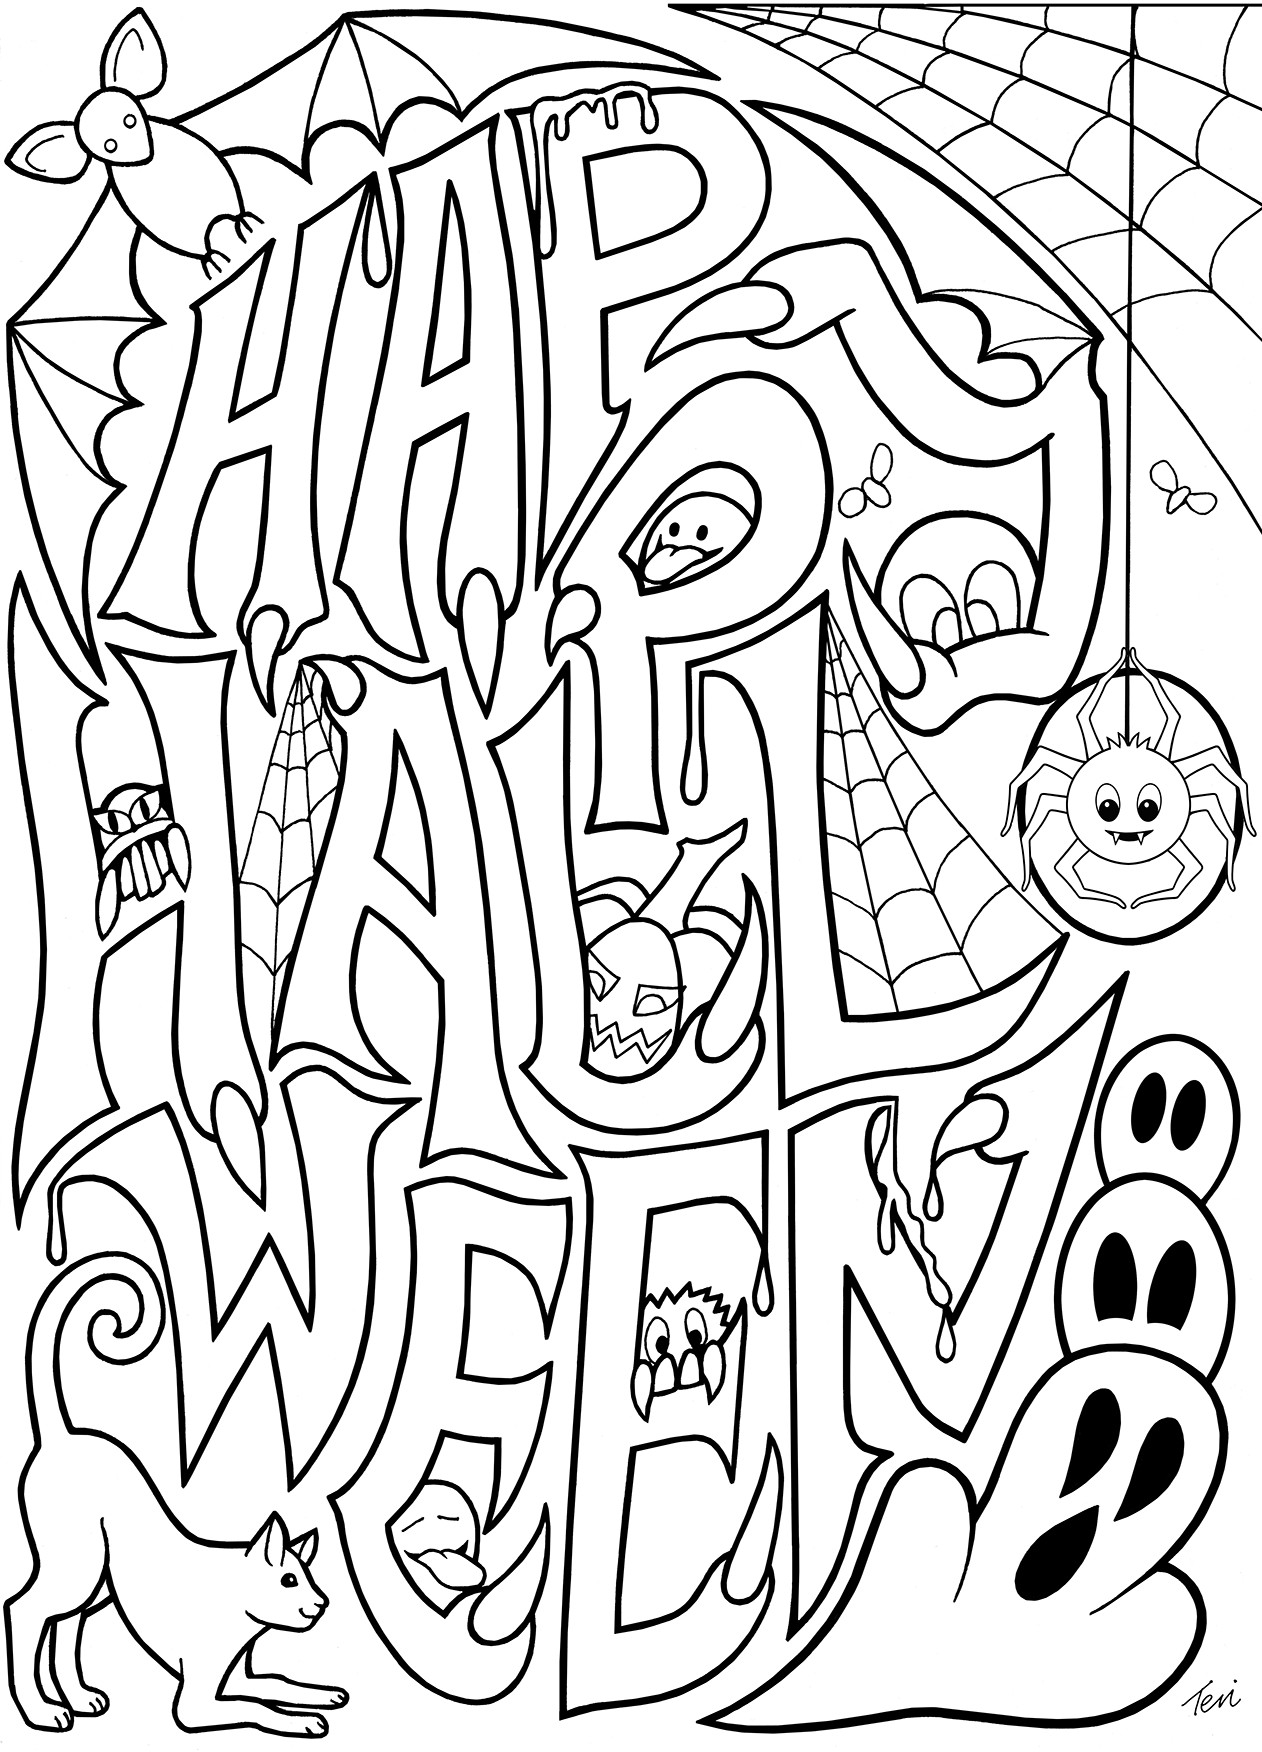 Halloween Fench Coloring Pages For Toddlers
 Free Adult Coloring Book Pages Happy Halloween by Blue